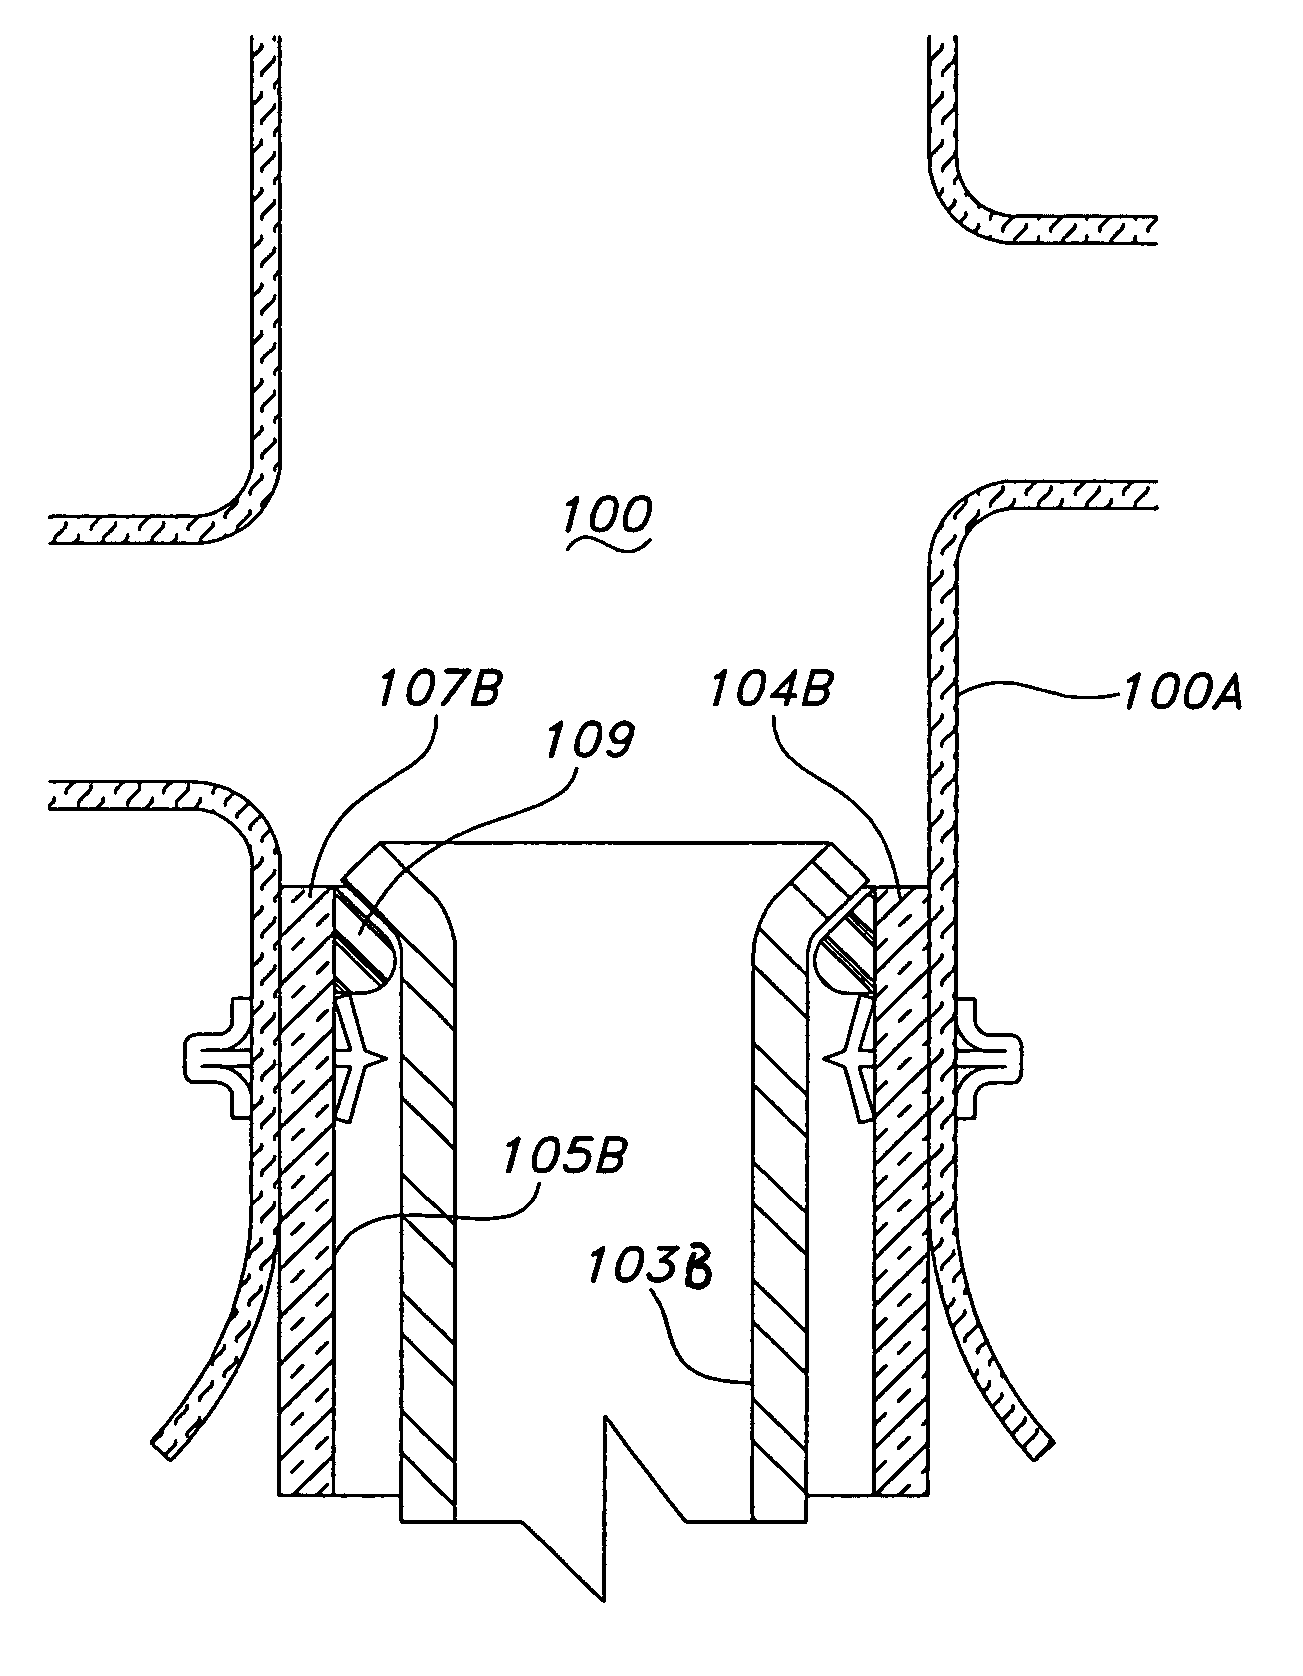 Prosthesis fixation device and method